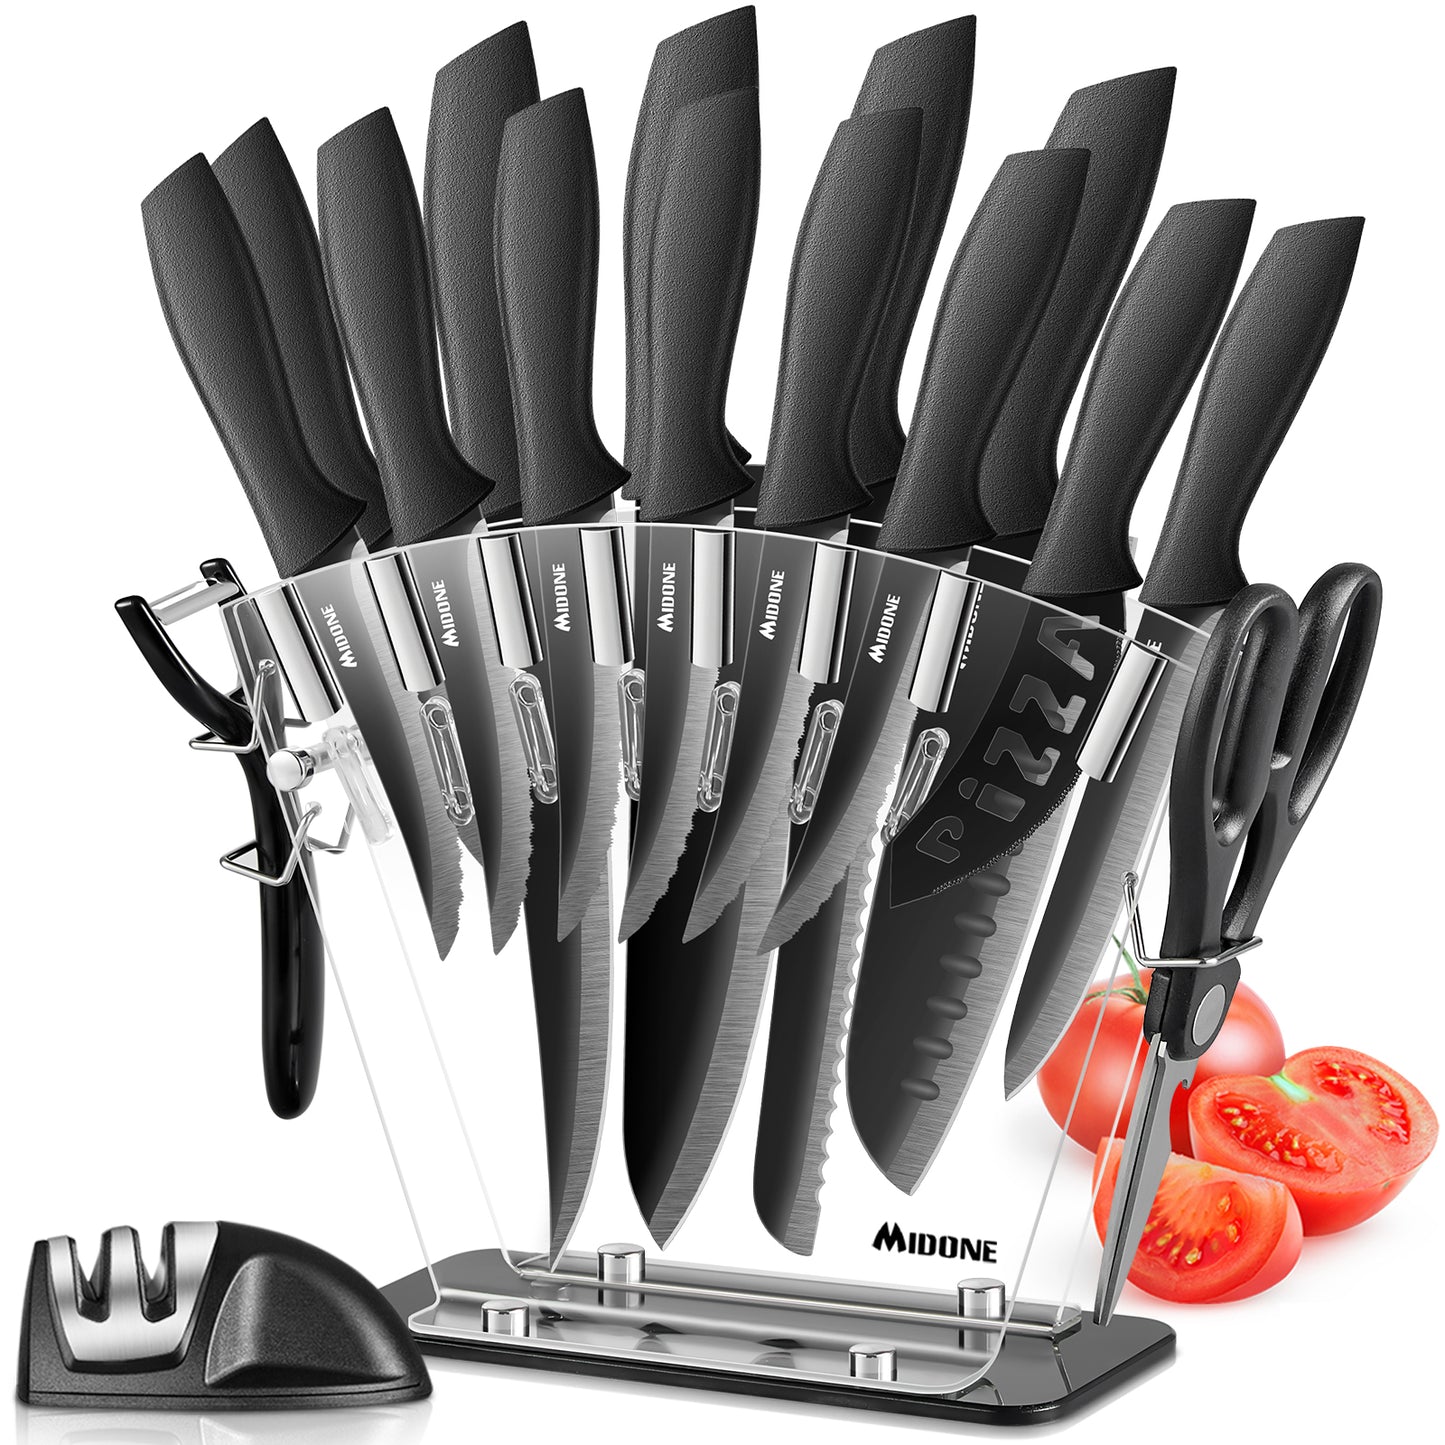 MIDONE Knife Set, 17 Pcs Stainless Steel Kitchen Knife Set, with Sharpener & Acrylic Stand, Black